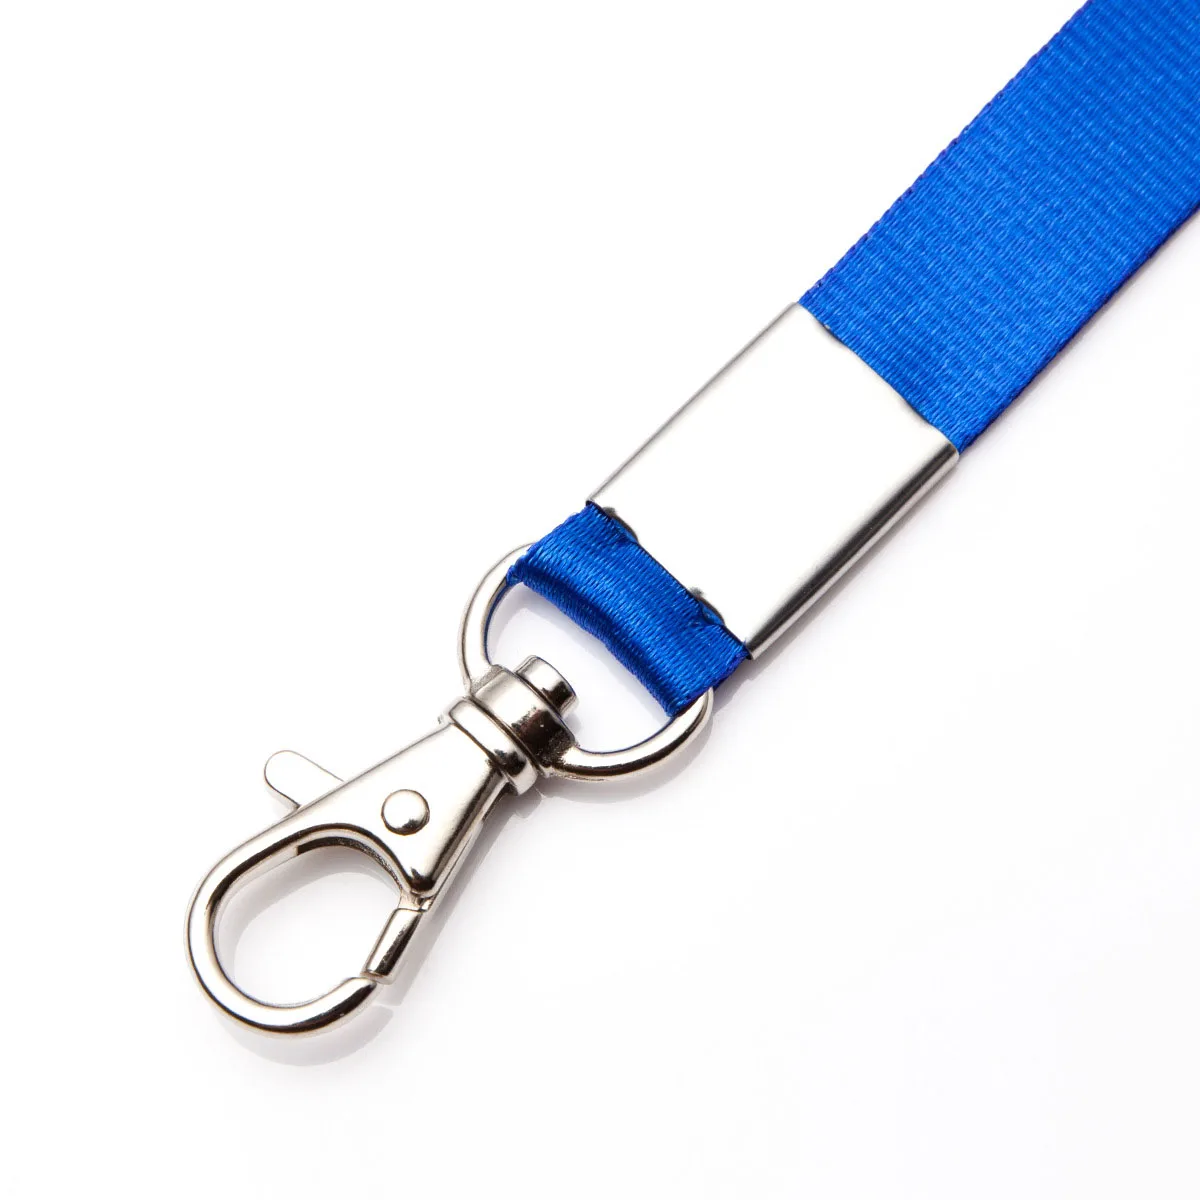 Business Promotional Gifts Multi ColorHanging Neck Strap Lanyard With ID Card Badge Holder Holder Keys Metal Ring